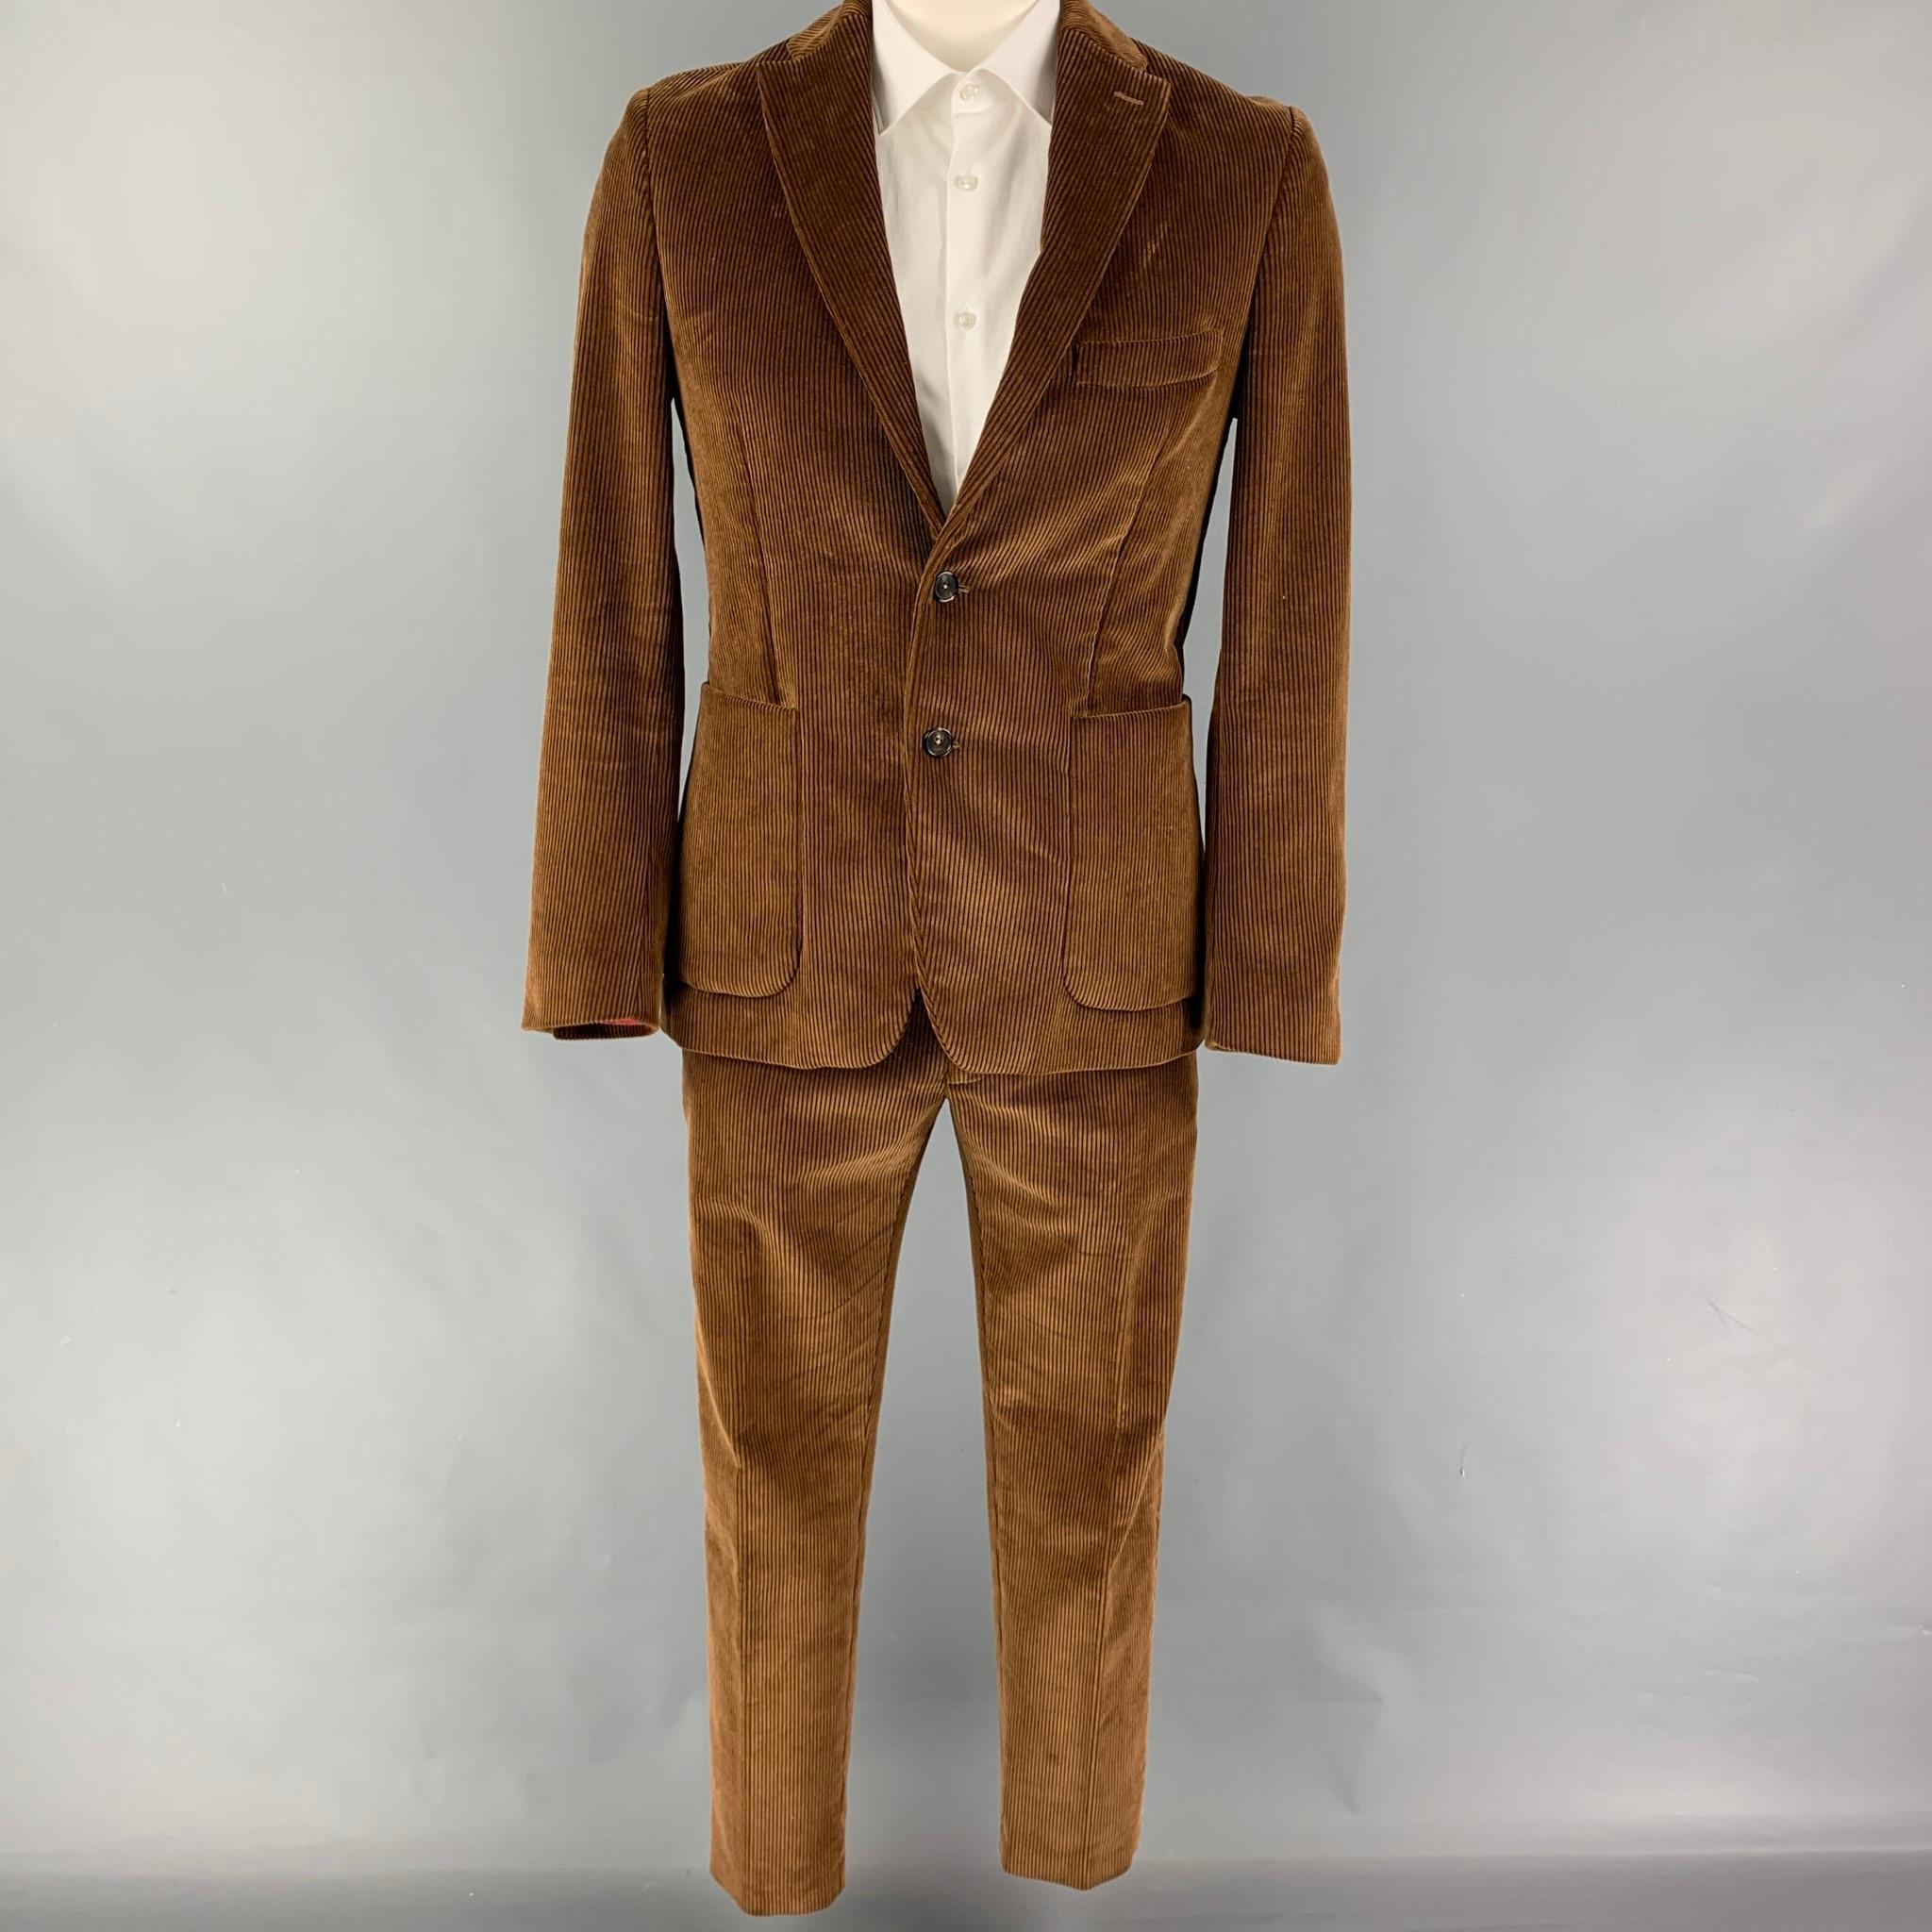 SALLE PRIVEE suit comes in a brown corduroy cotton with a full liner and includes a single breasted, double button sport coat with a notch lapel and matching flat front trousers.

Very Good Pre-Owned Condition.
Marked: